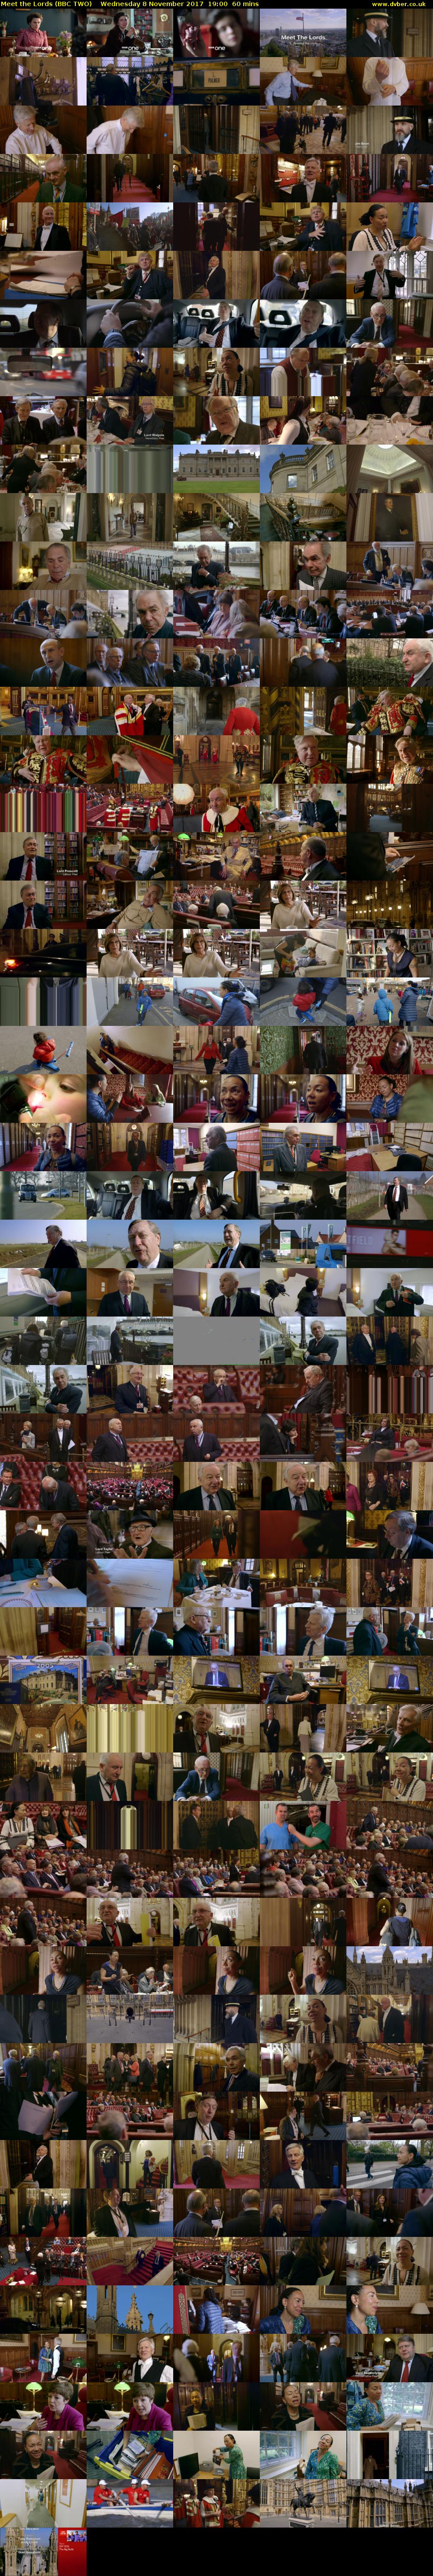 Meet the Lords (BBC TWO) Wednesday 8 November 2017 19:00 - 20:00